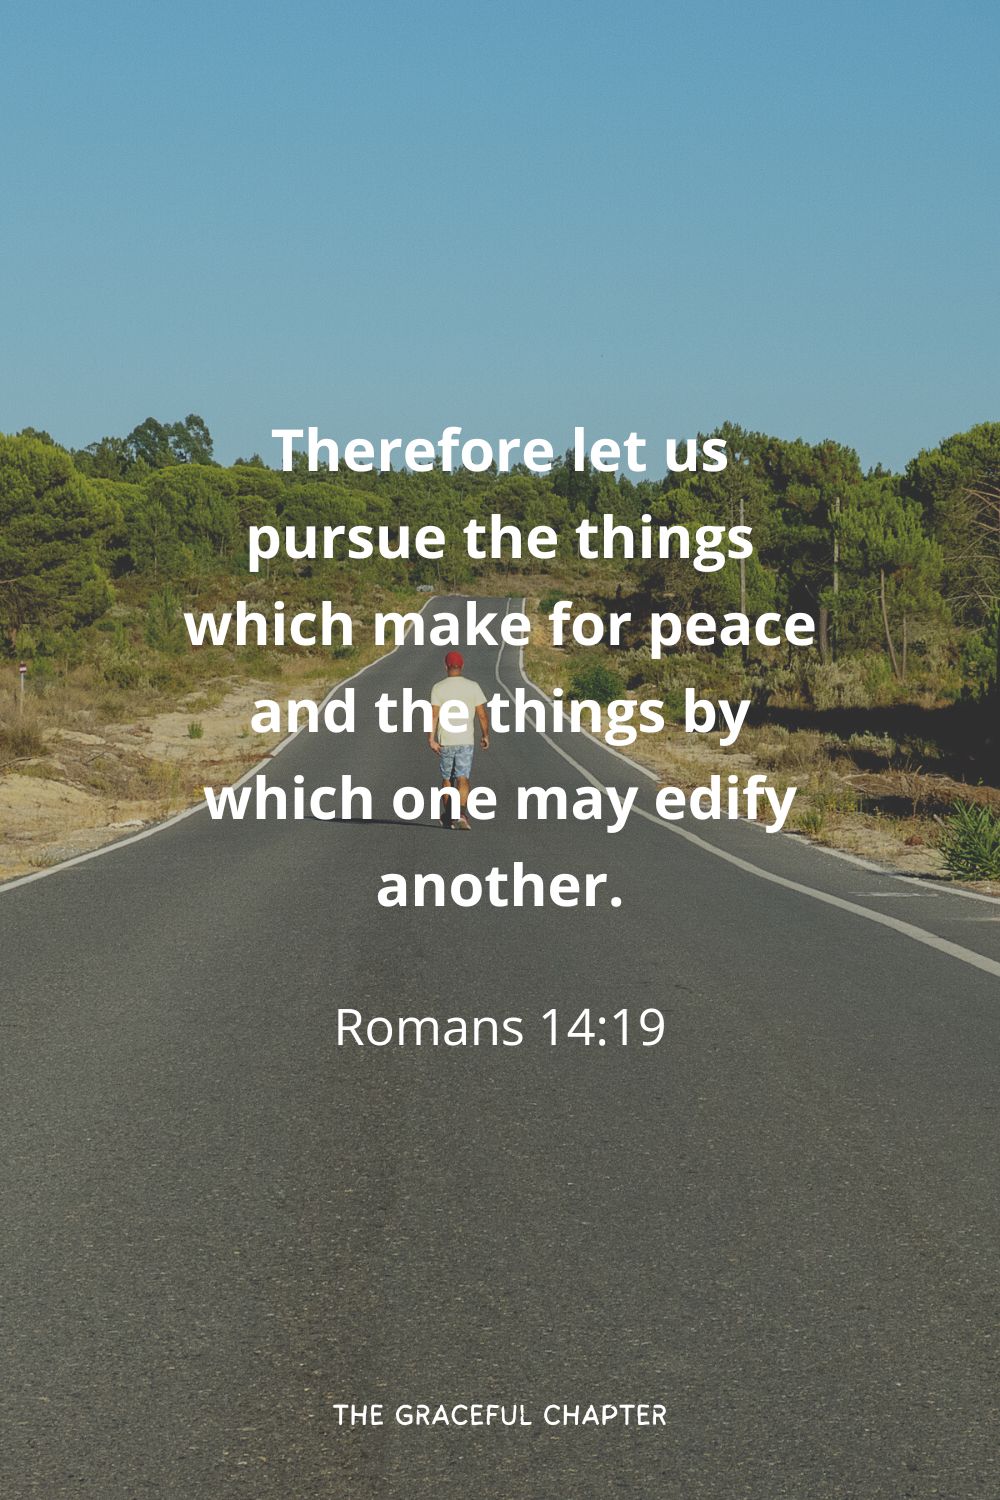 Therefore let us pursue the things which make for peace and the things by which one may edify another.